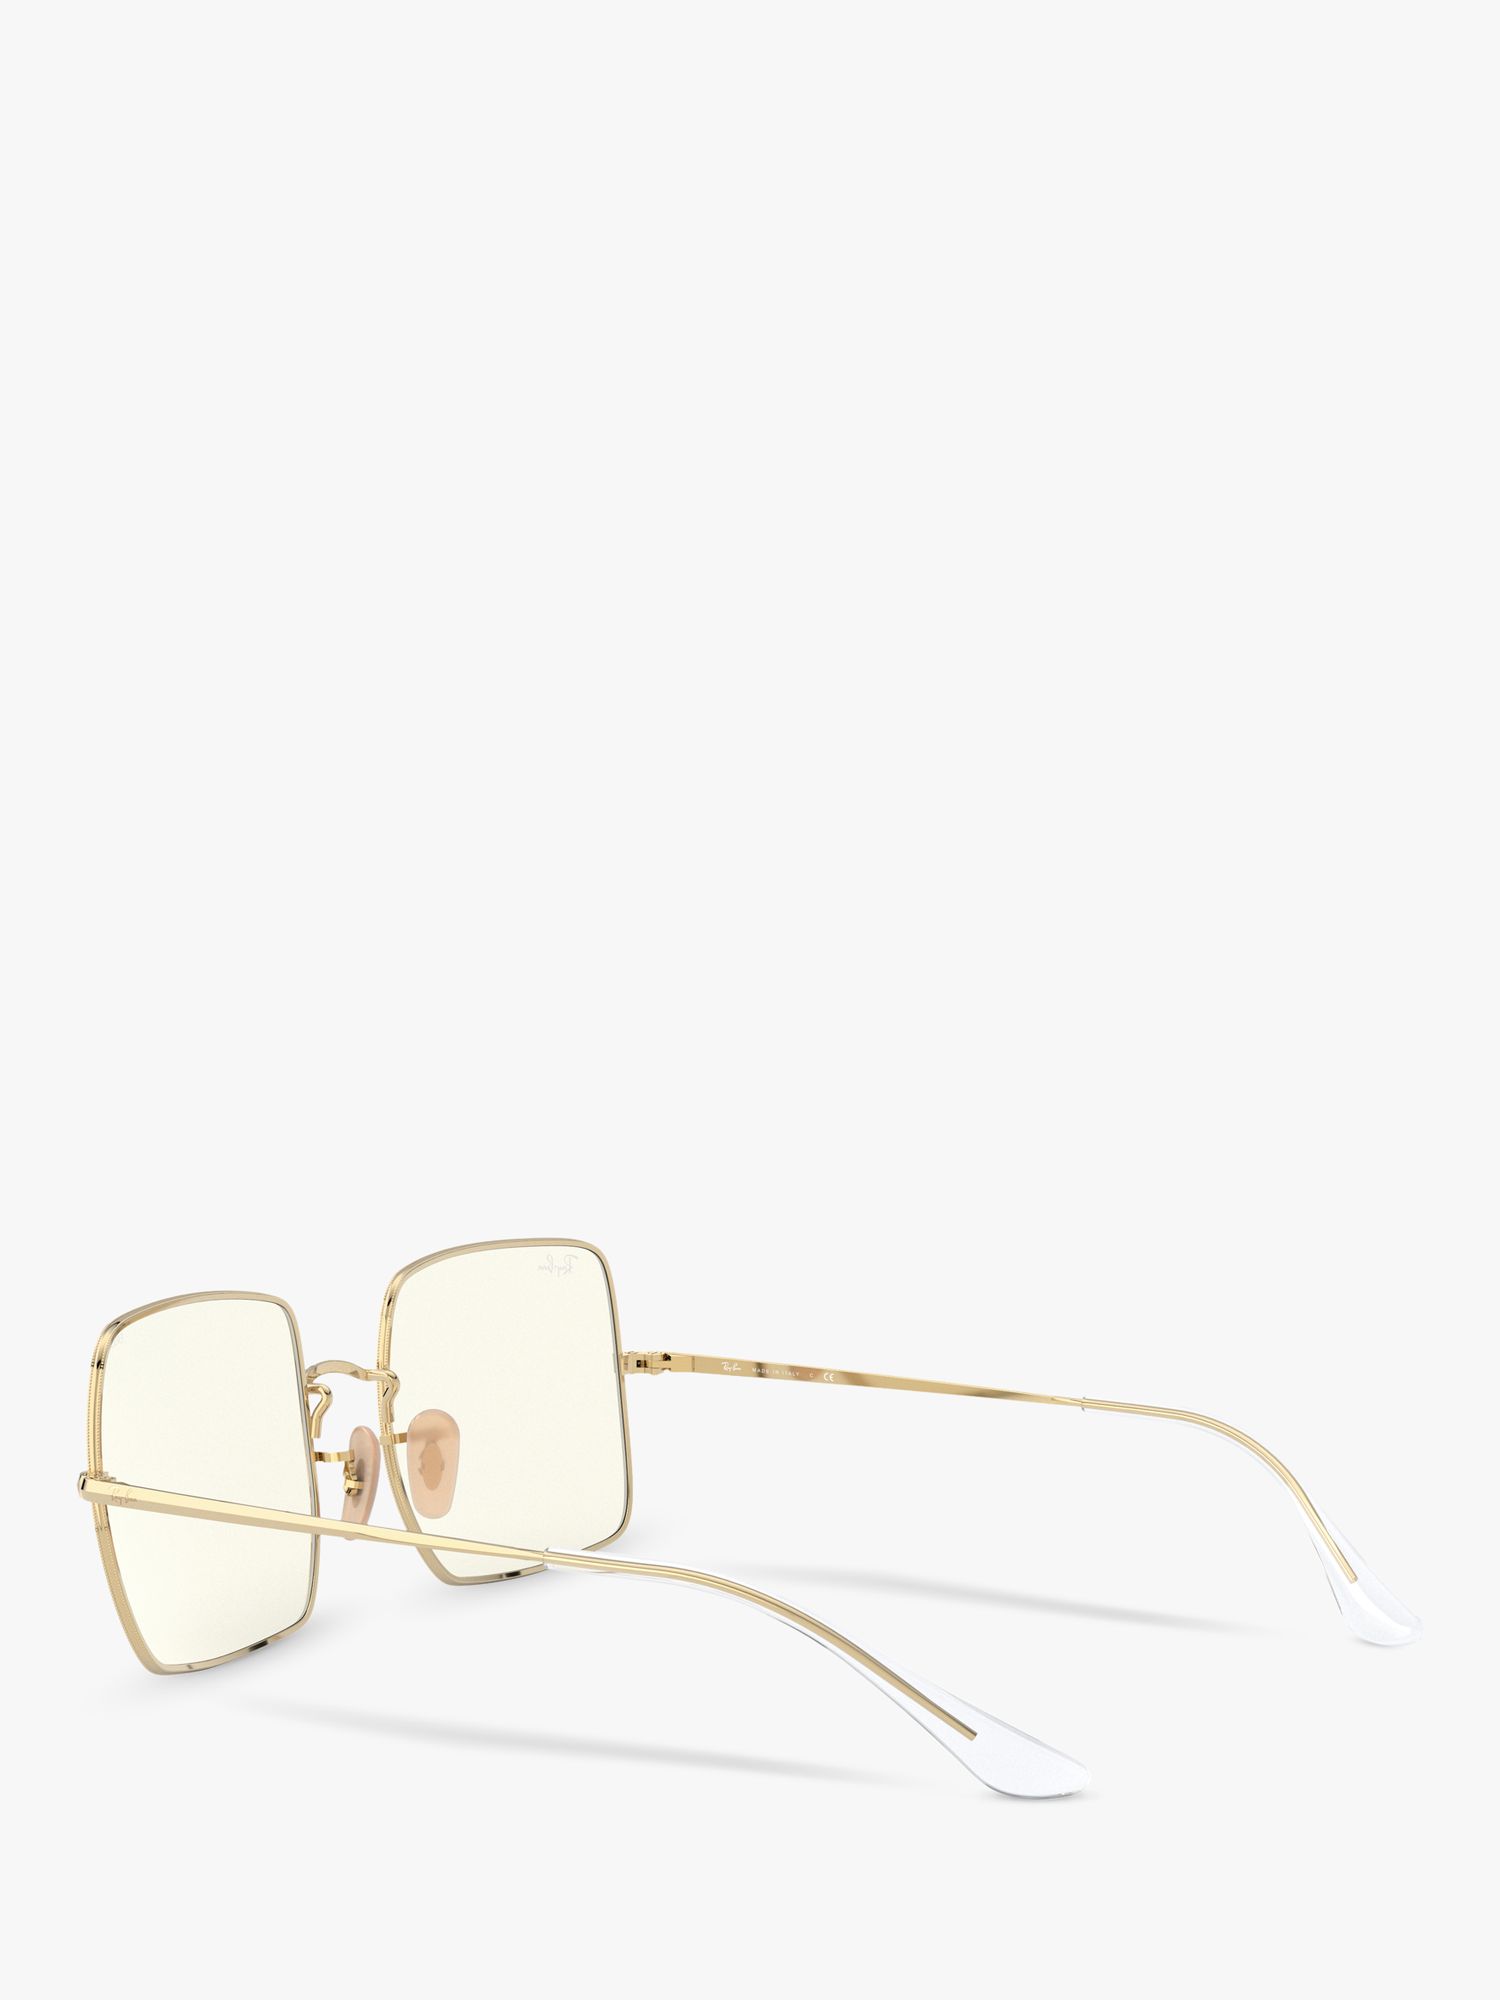 Buy Ray-Ban RB1971 Women's Square Sunglasses, Gold/Clear Grey Online at johnlewis.com